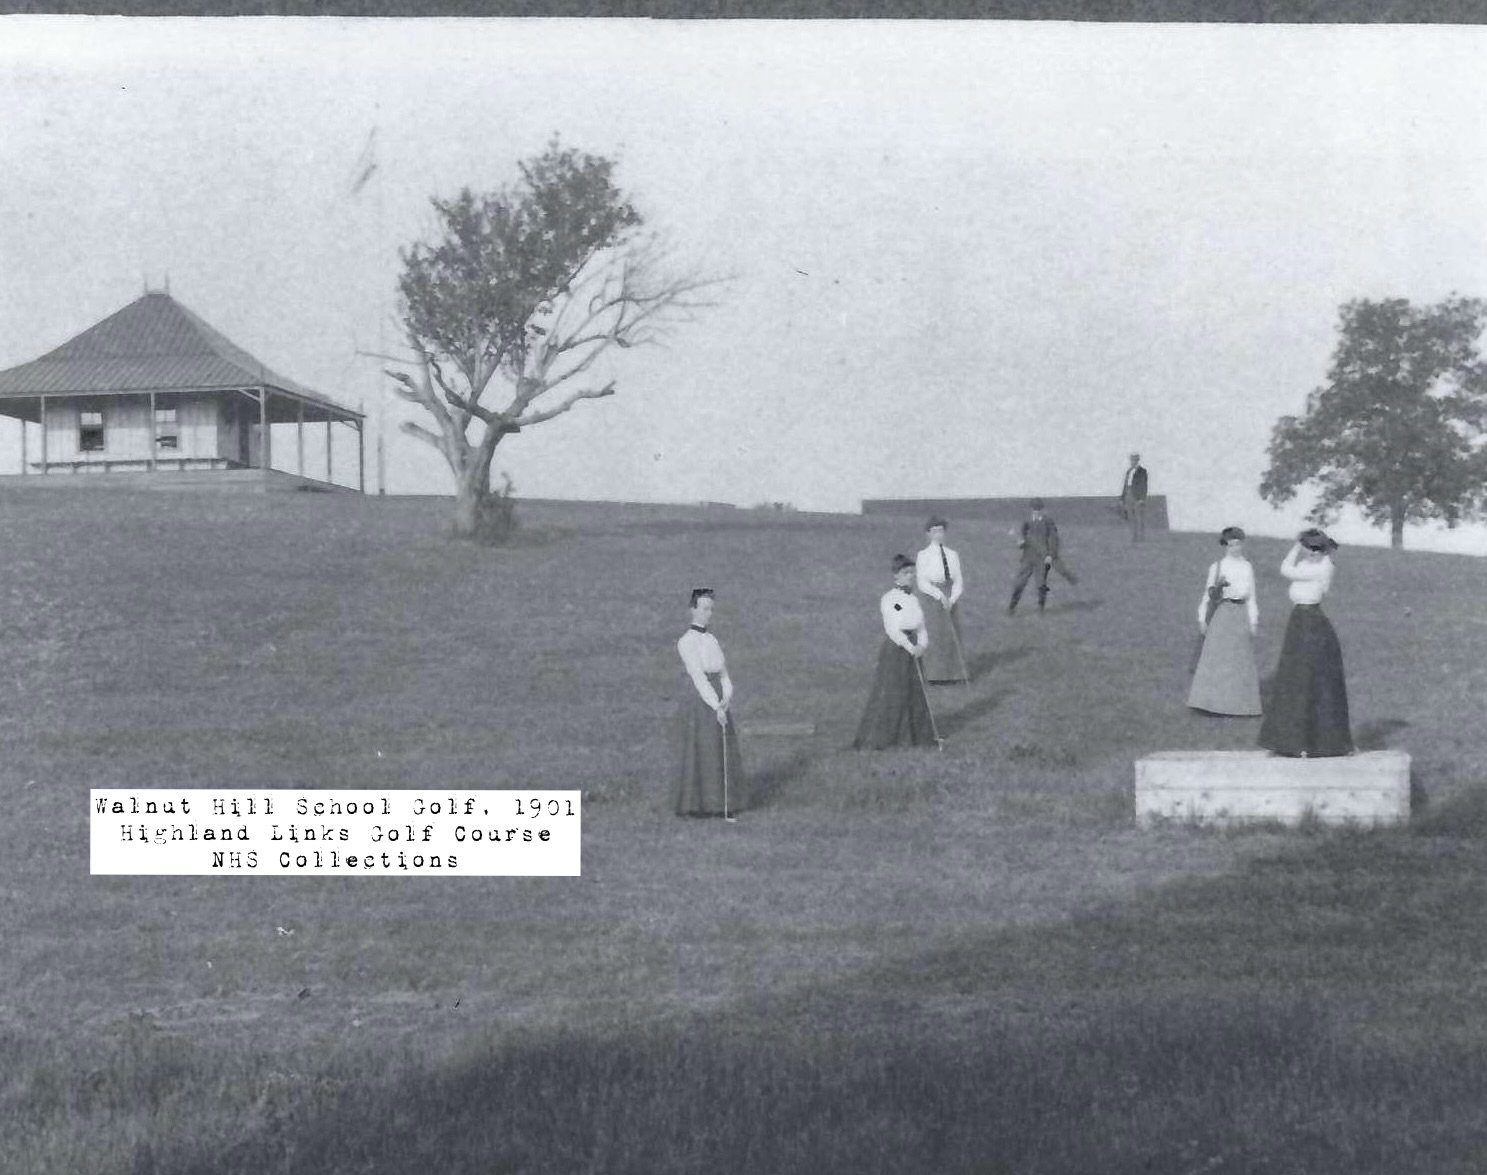 Is anyone ready to hit the links? This picture shows the Walnut Hill School golf club at Highland Links Golf Course, located behind the Walnut Hill School on a hill called Golf Hill. Can you imagine teeing up wearing those long skirts? The second ima